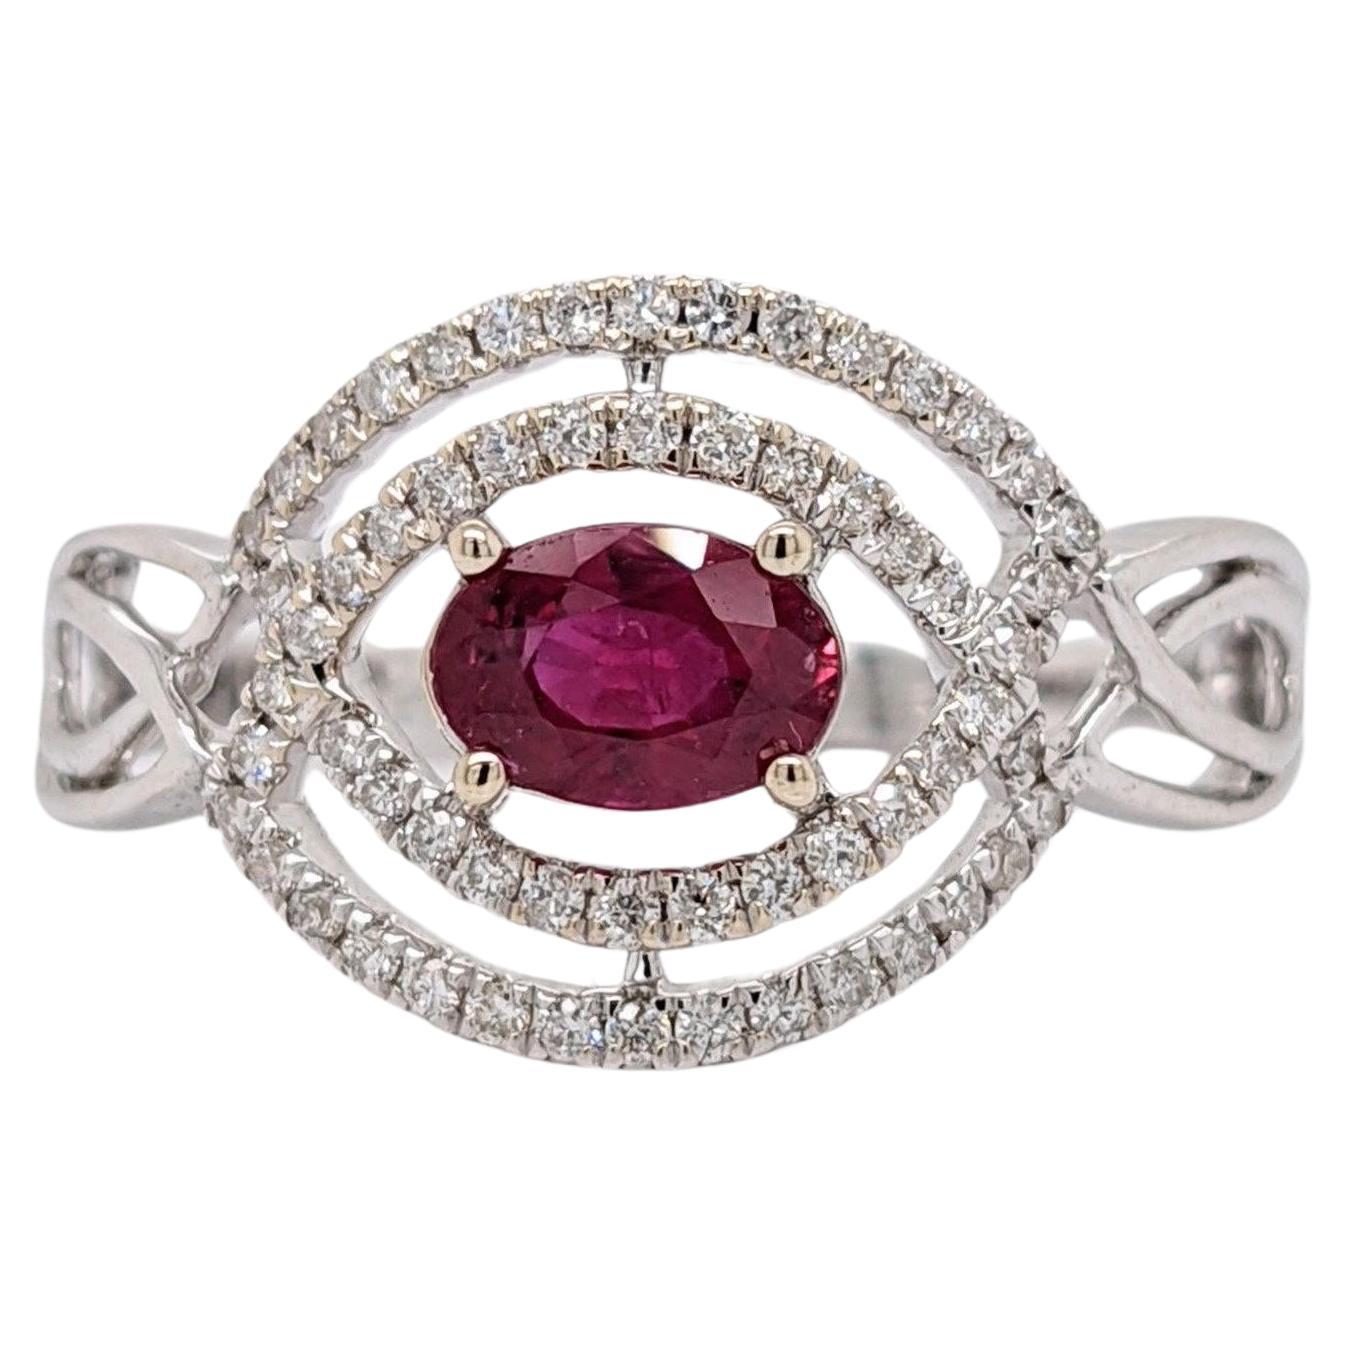 East West Red Ruby Ring w Earth Mined Diamond in Solid 14k White Gold Oval 6x4mm